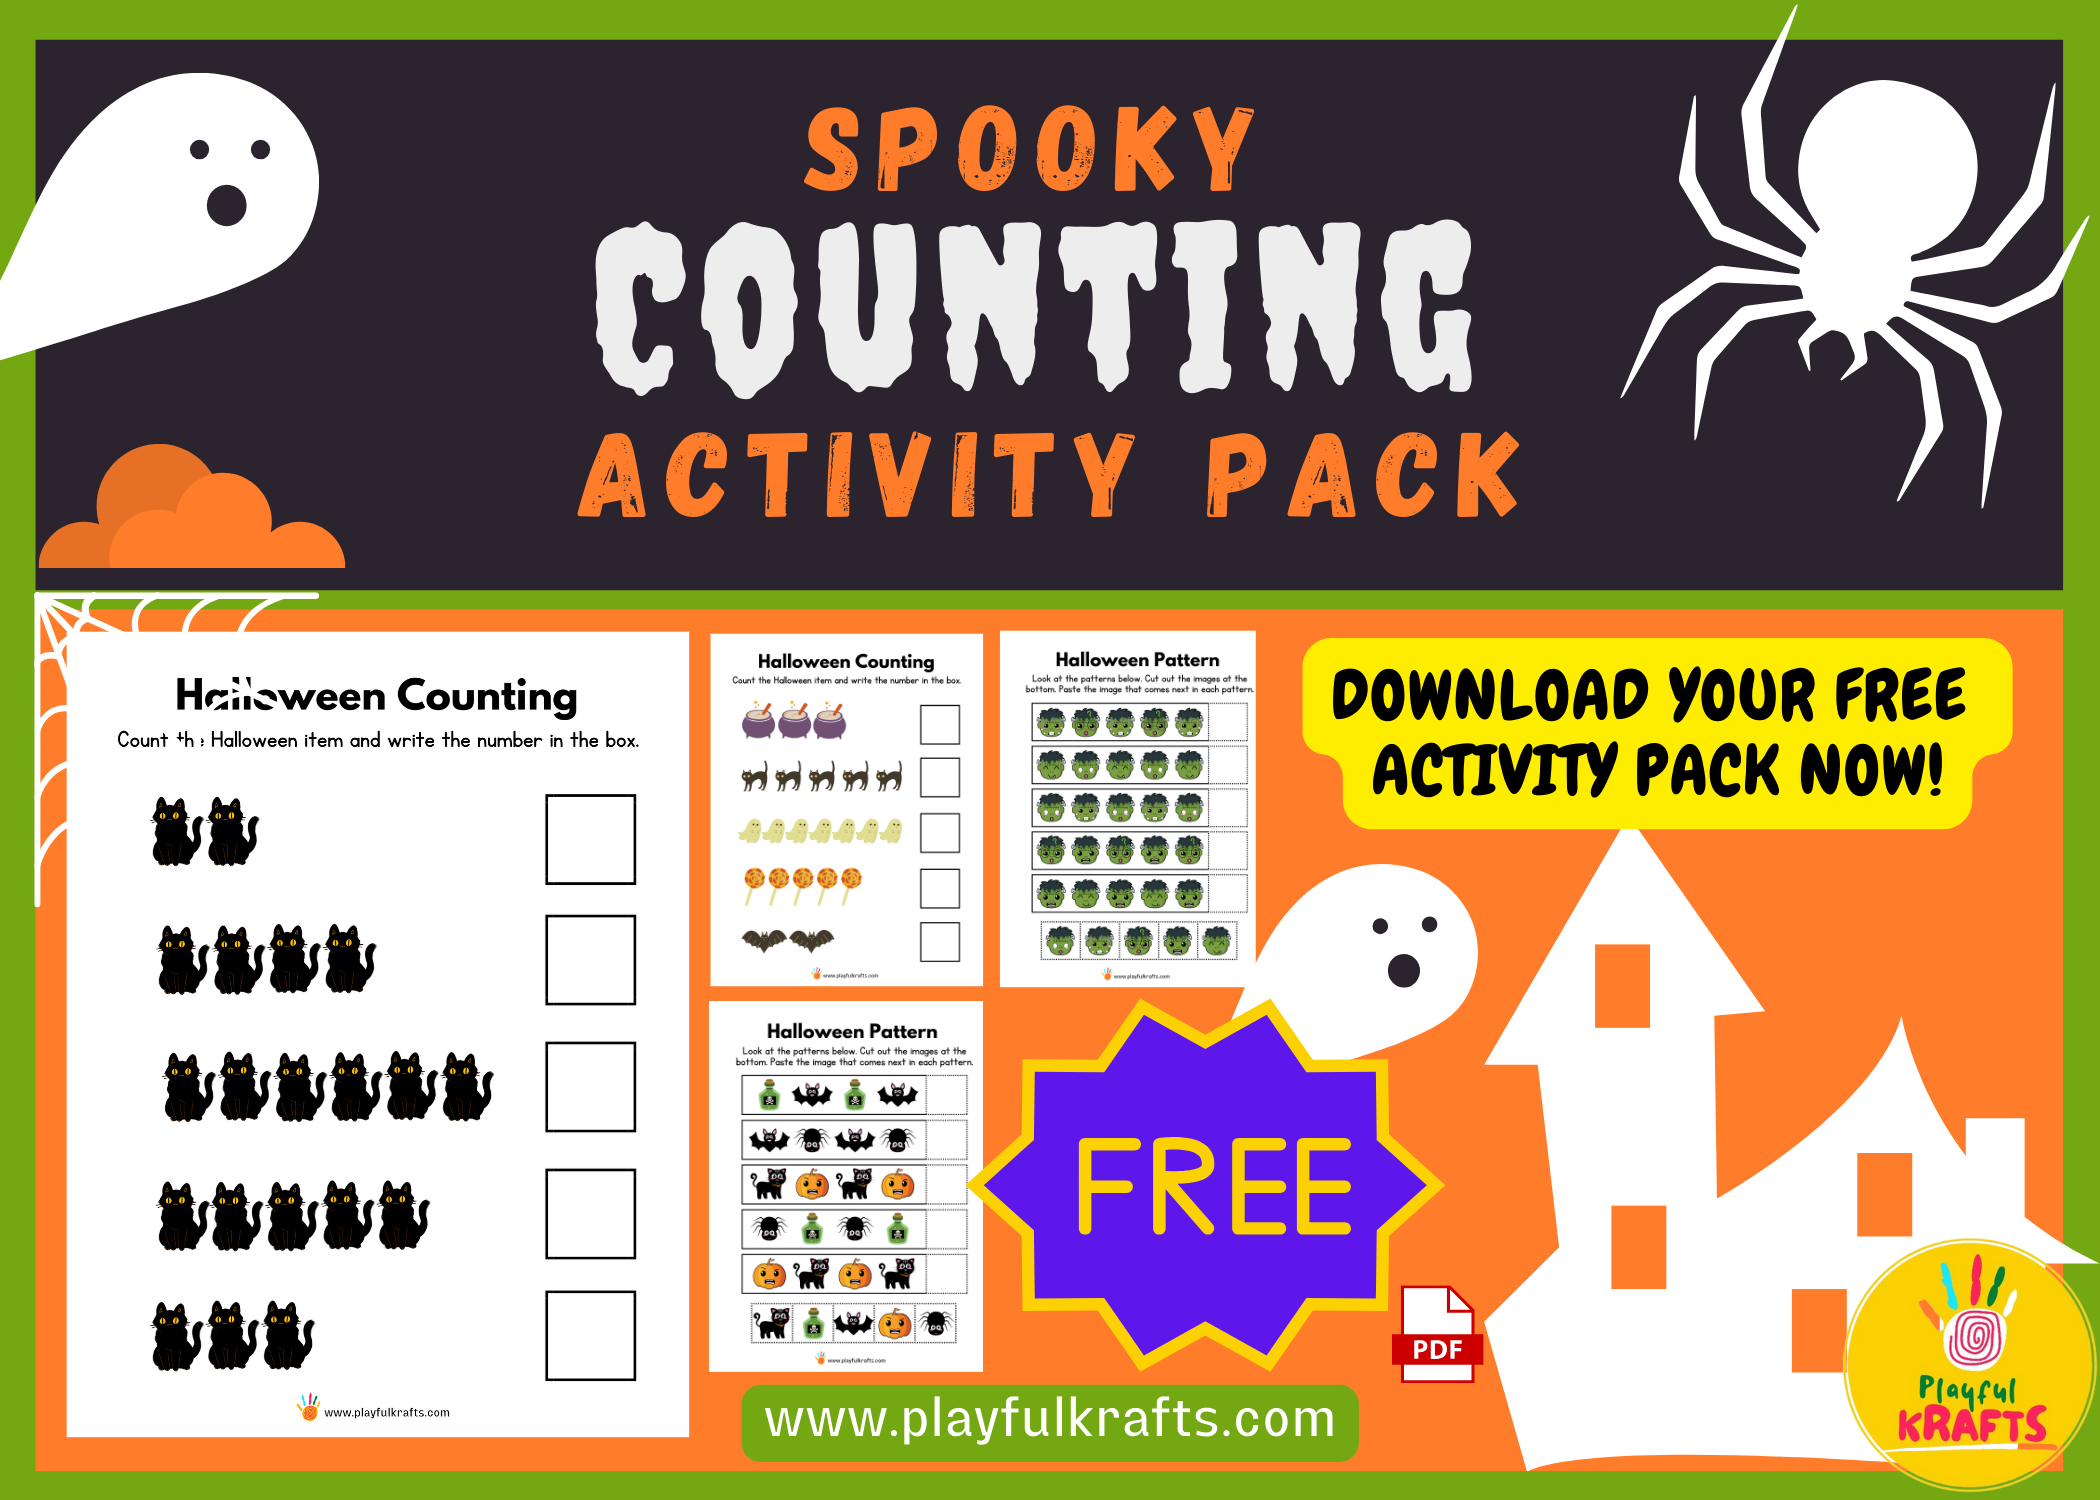 Halloween-counting-free-activity-pack-for-kids